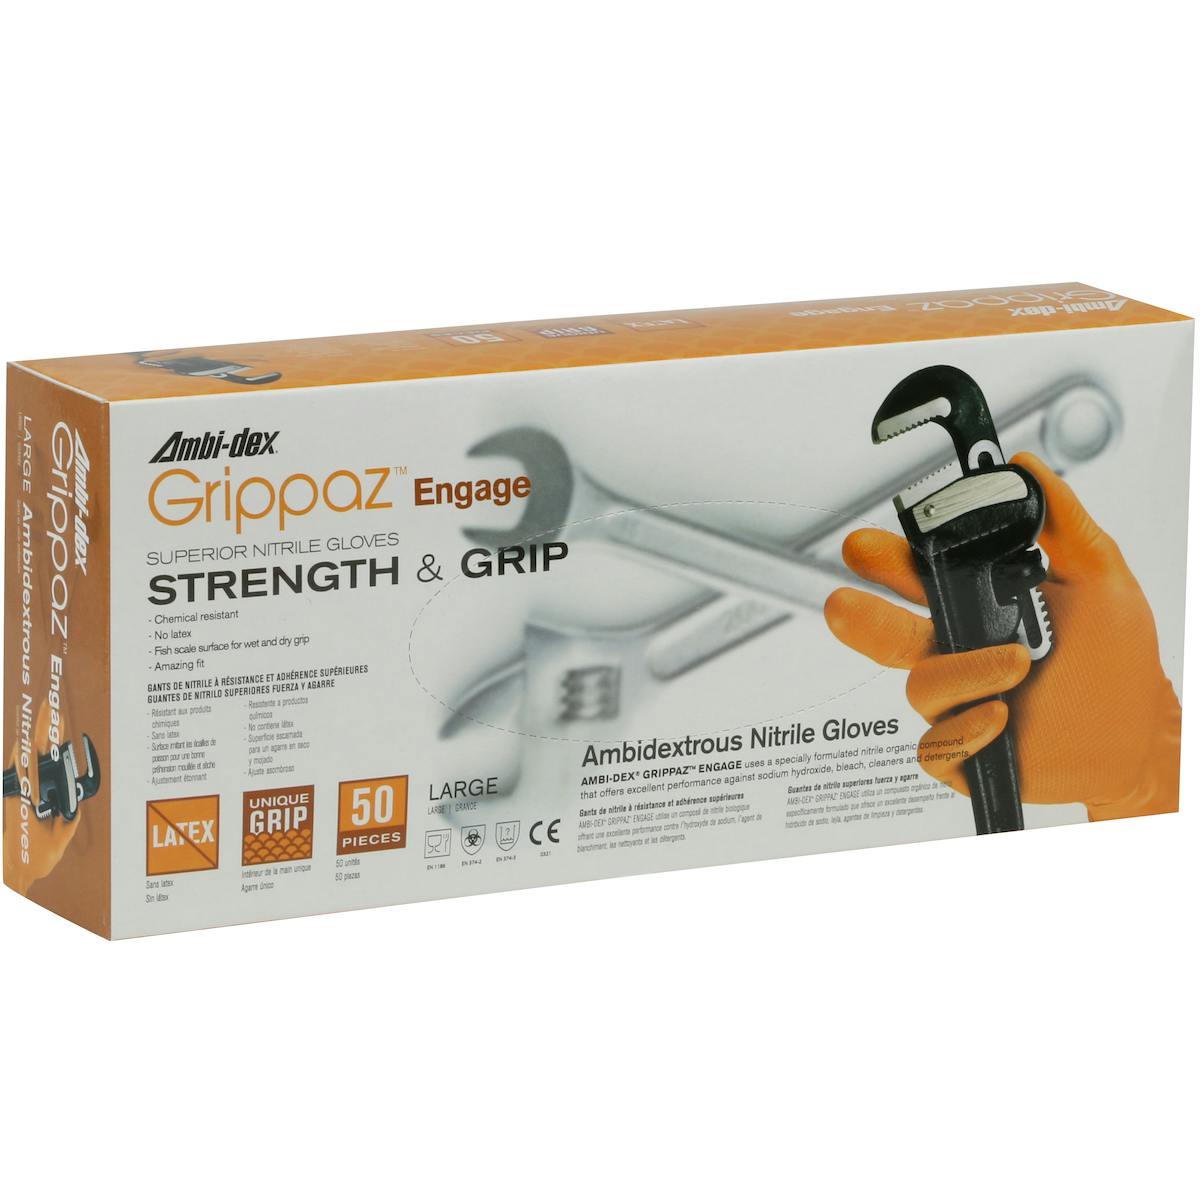 Grippaz™ Engage Extended Use Ambidextrous Nitrile Glove with Textured Fish Scale Grip - 7 Mil (67-307)